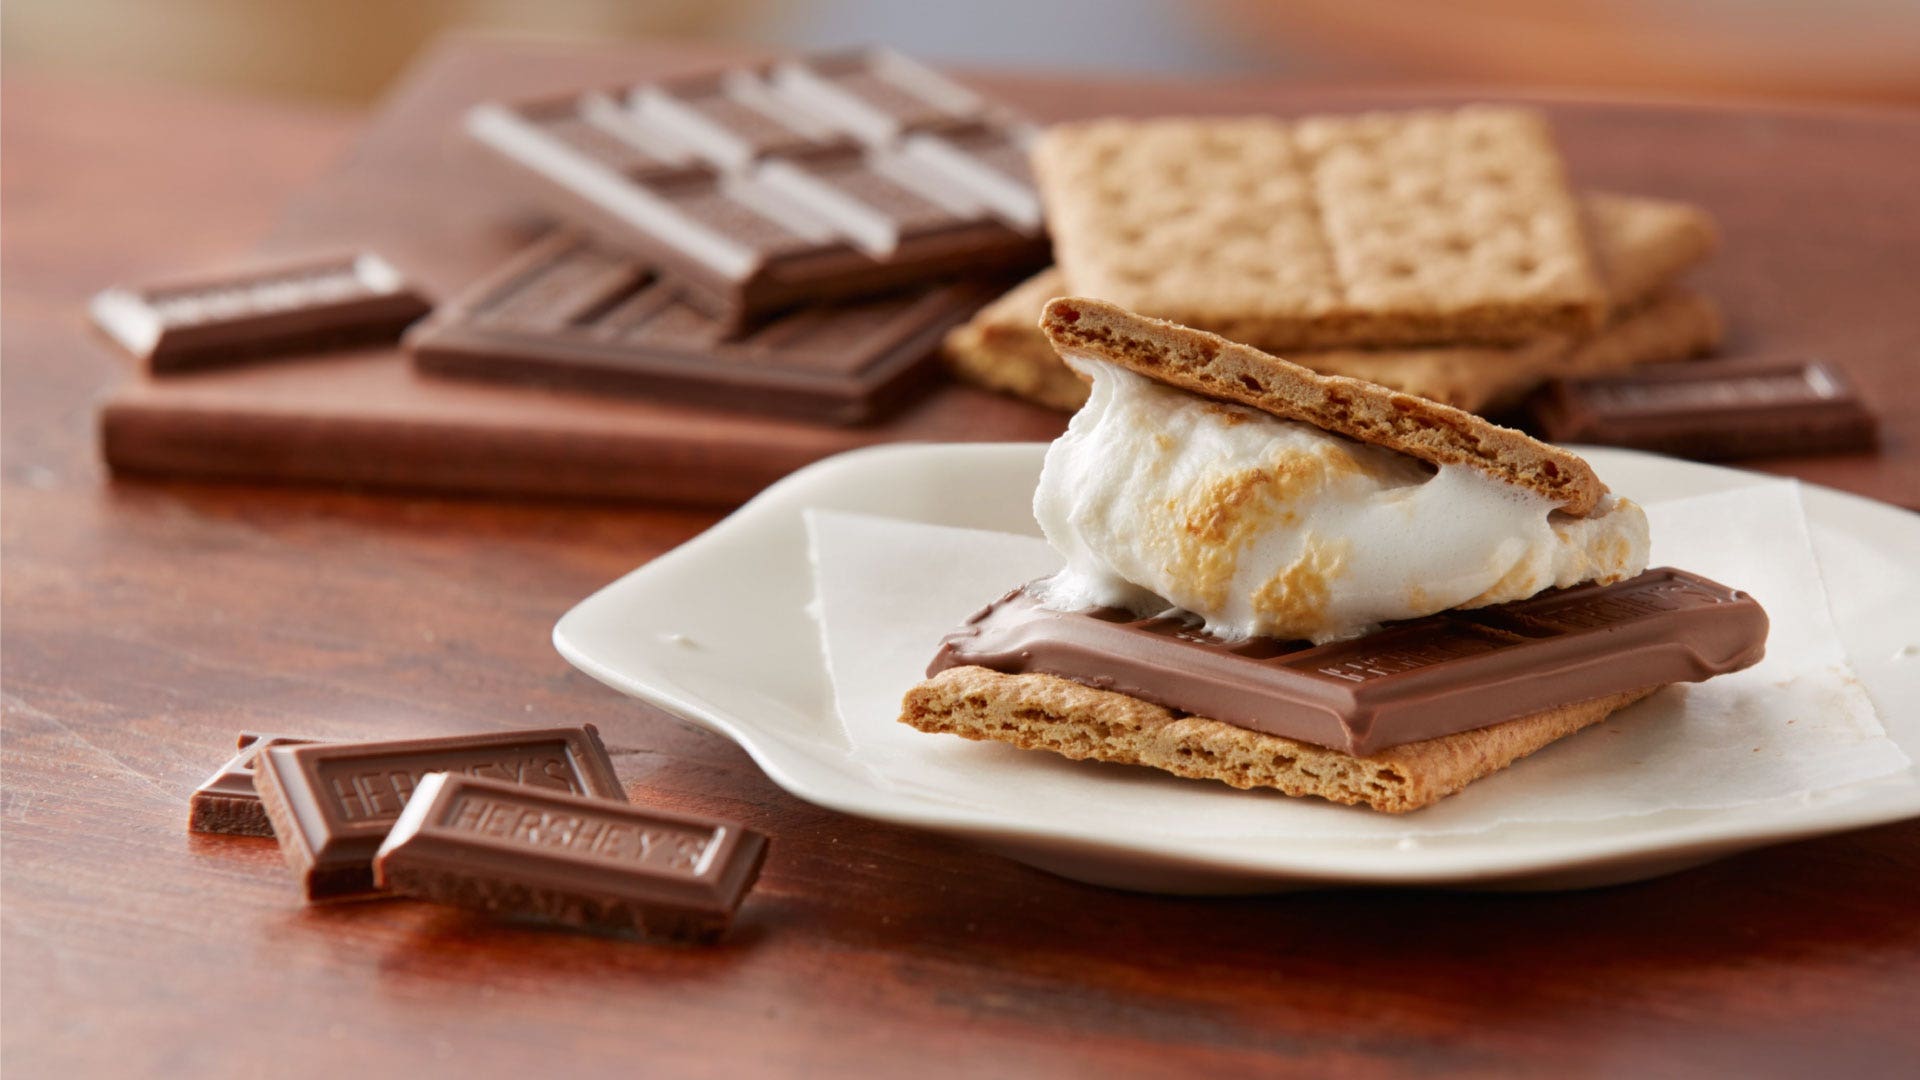 HERSHEY'S S'mores